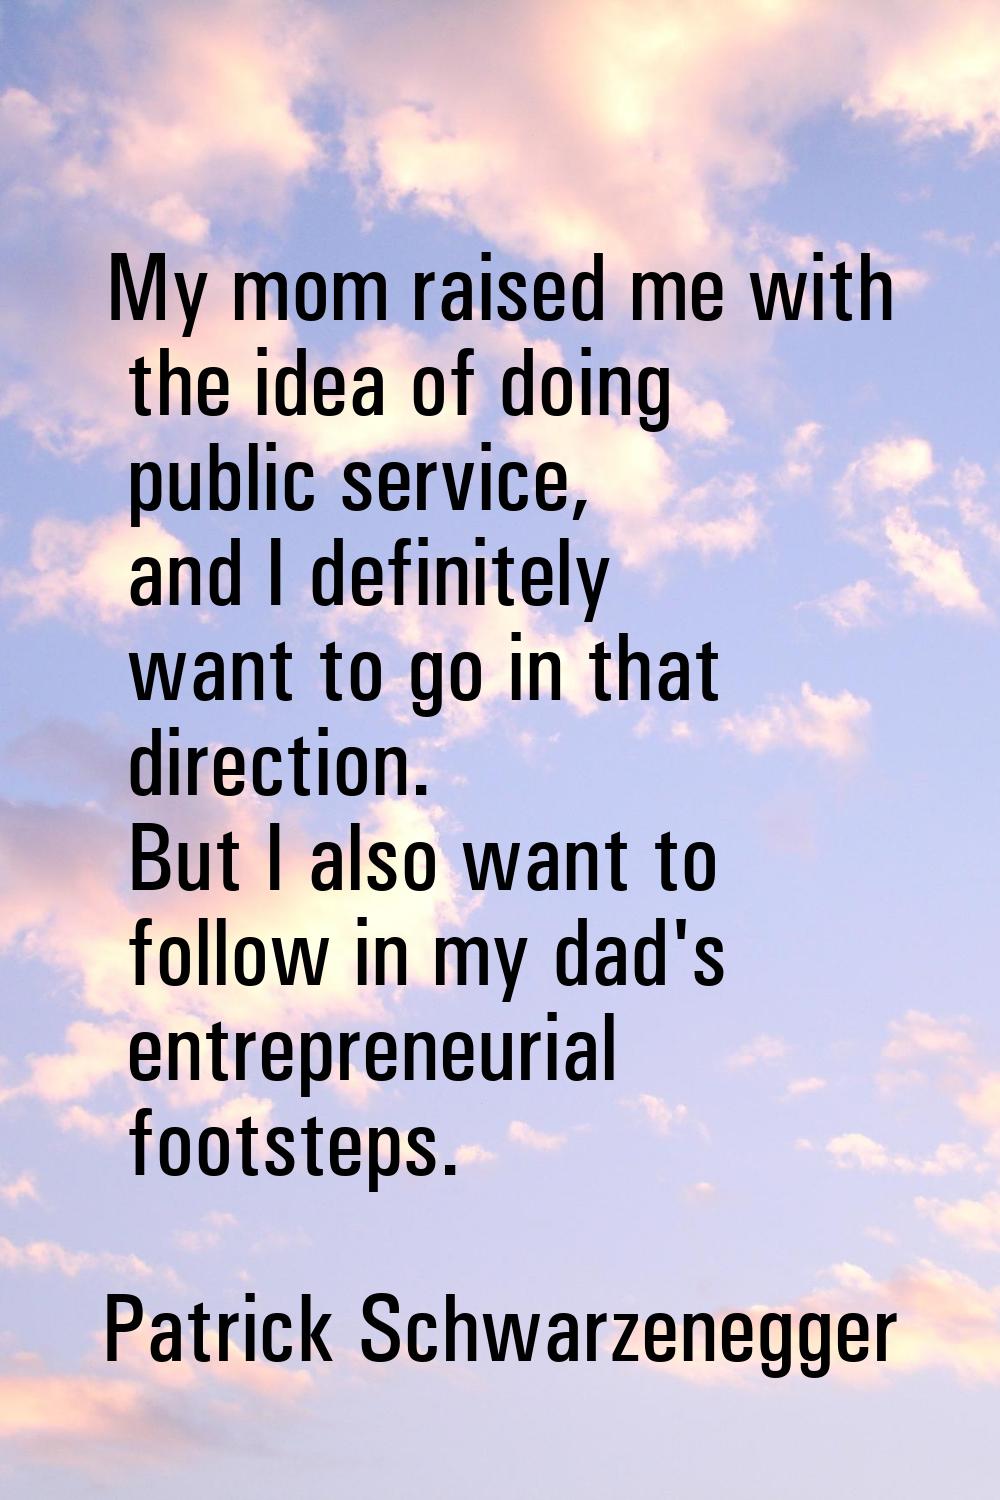 My mom raised me with the idea of doing public service, and I definitely want to go in that directi